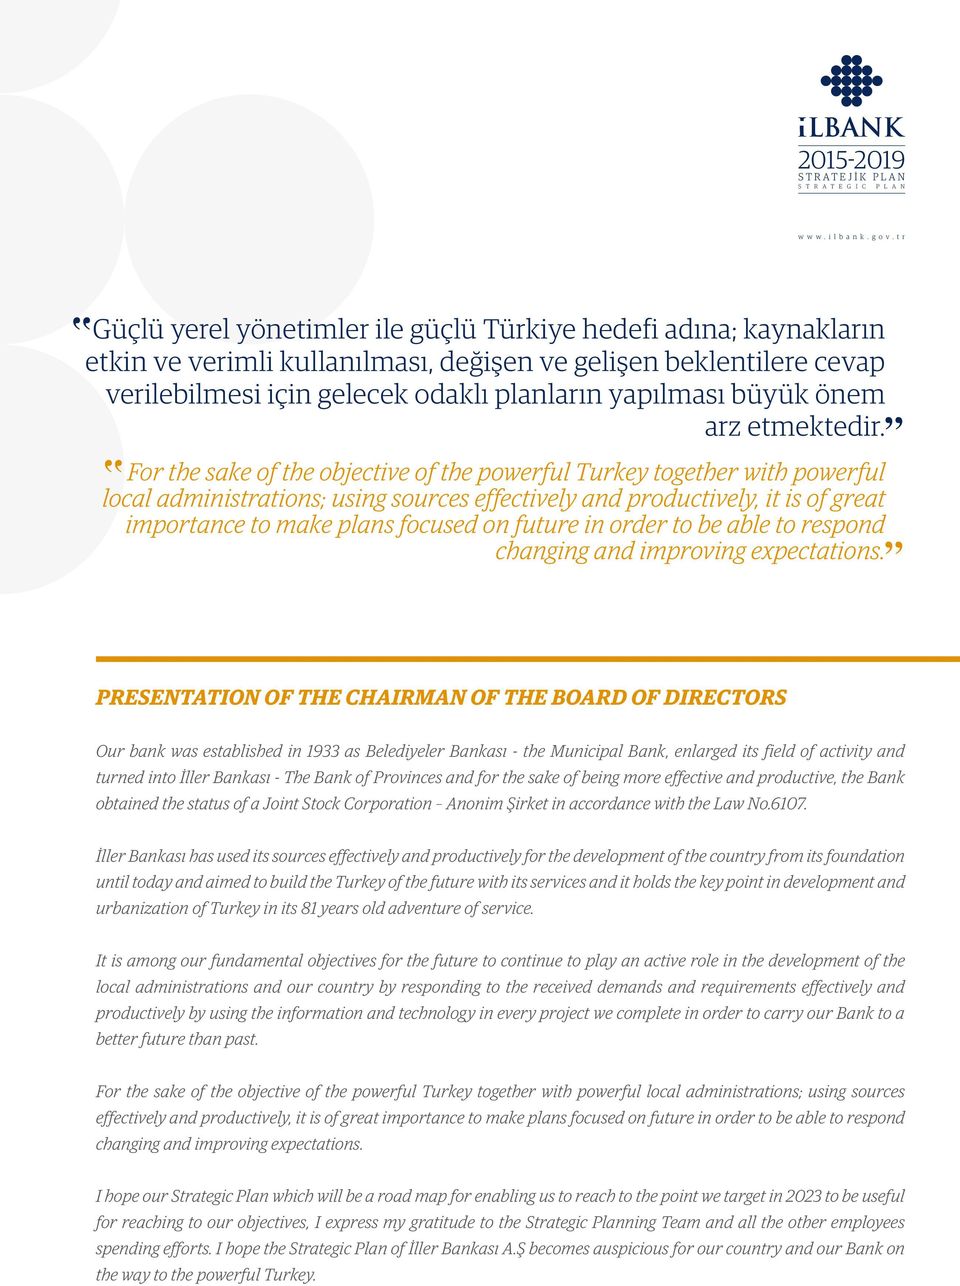 For the sake of the objective of the powerful Turkey together with powerful local administrations; using sources effectively and productively, it is of great importance to make plans focused on